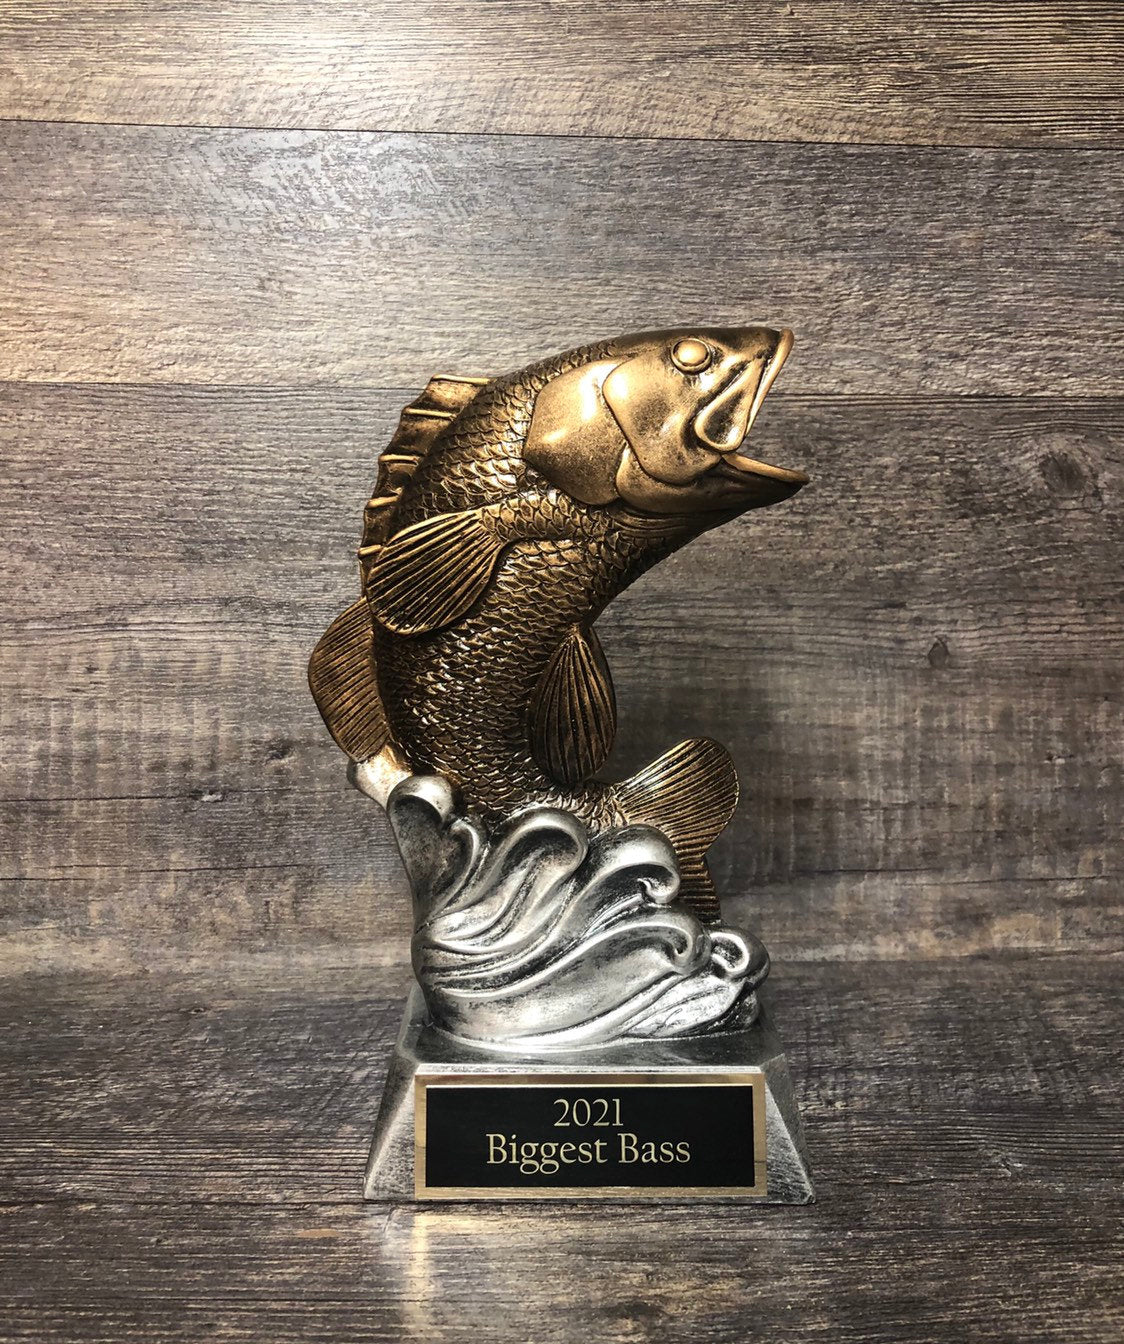 Bass Trophy Fishing Trophy Fishing Derby Tournament Trophy Award Biggest Bass Fish Personalized Trophy Biggest Fish Competition Winner